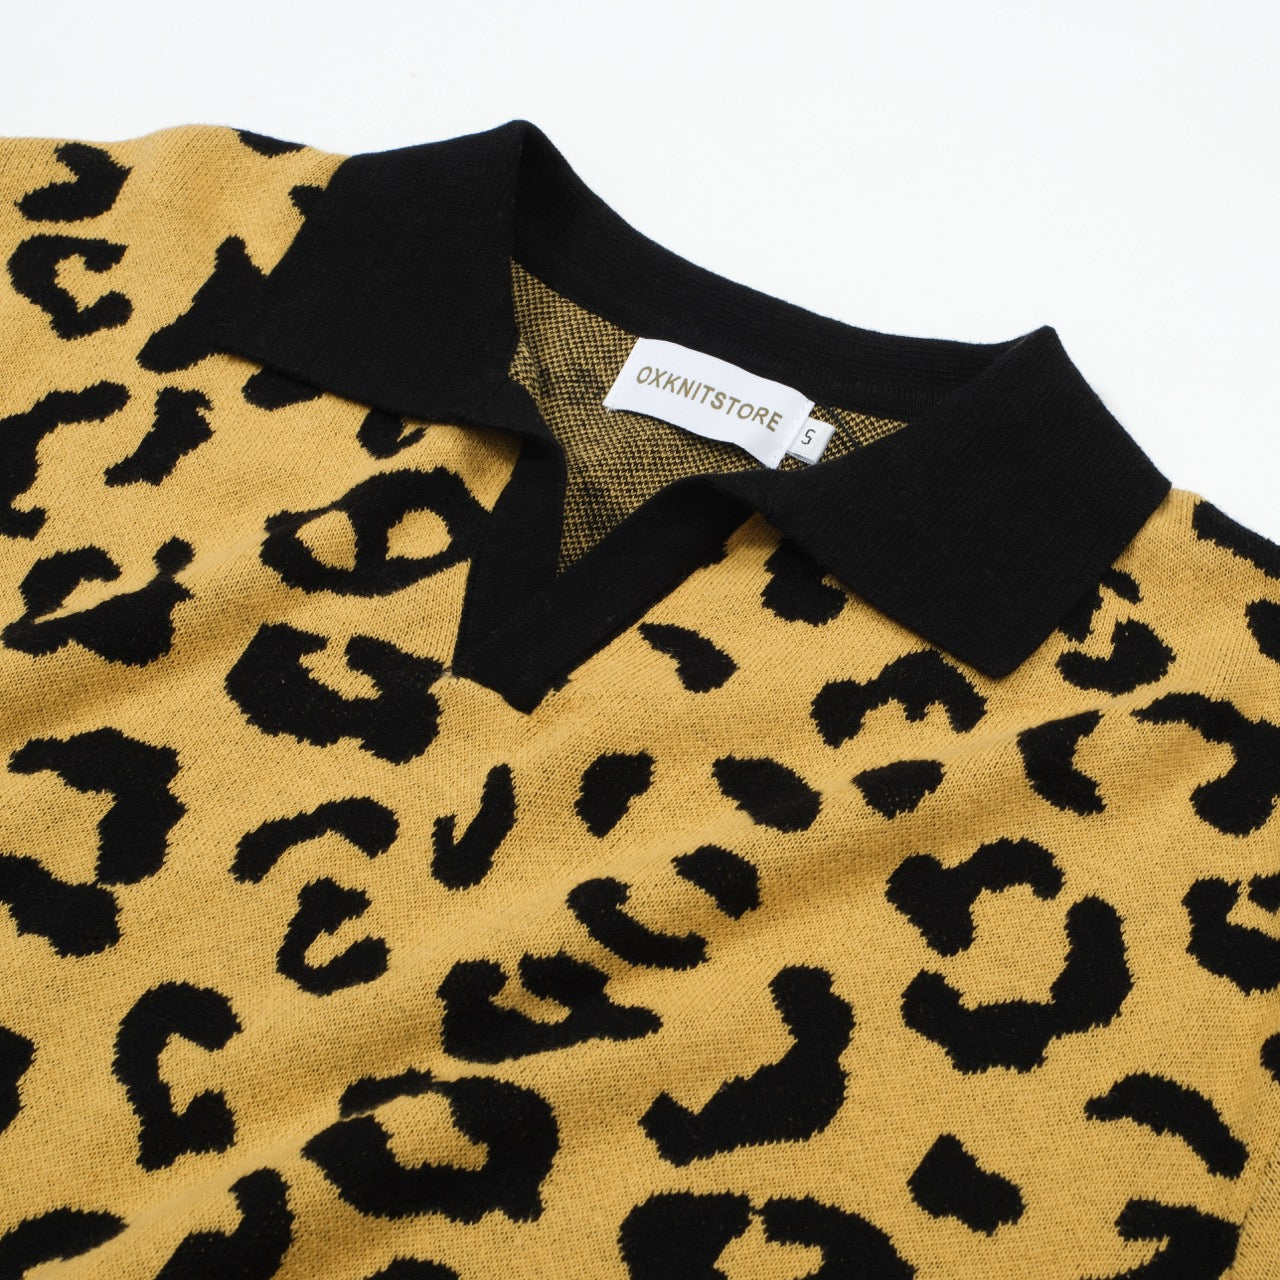 OXKNIT Men Vintage Clothing 1960s Mod Style Casual Leopard Yellow Retro Polo Shirt